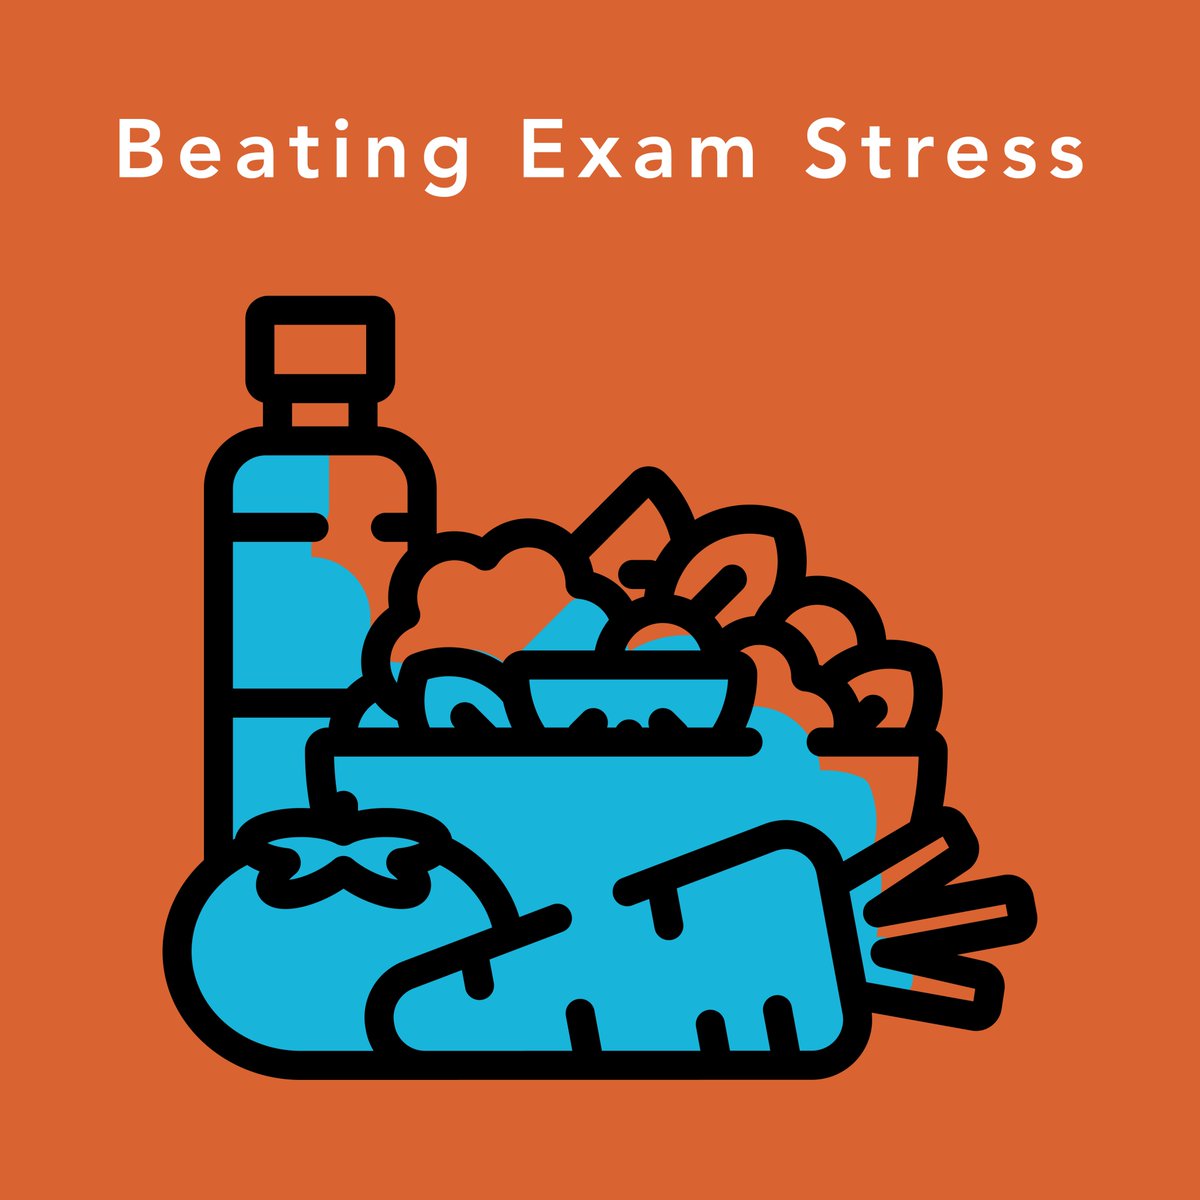 Good luck Year 11 as we enter week 3 of exams - time for a #BeatingExamStress tip Eat healthily and regularly; Eating healthy regular meals will help your brain work at its best. Try not to drink too much coffee, tea and fizzy drinks. 🥗🥘🍲🥙🧆🍛🍝🍜🍞🥔🥕🍊🍌🍇🍈